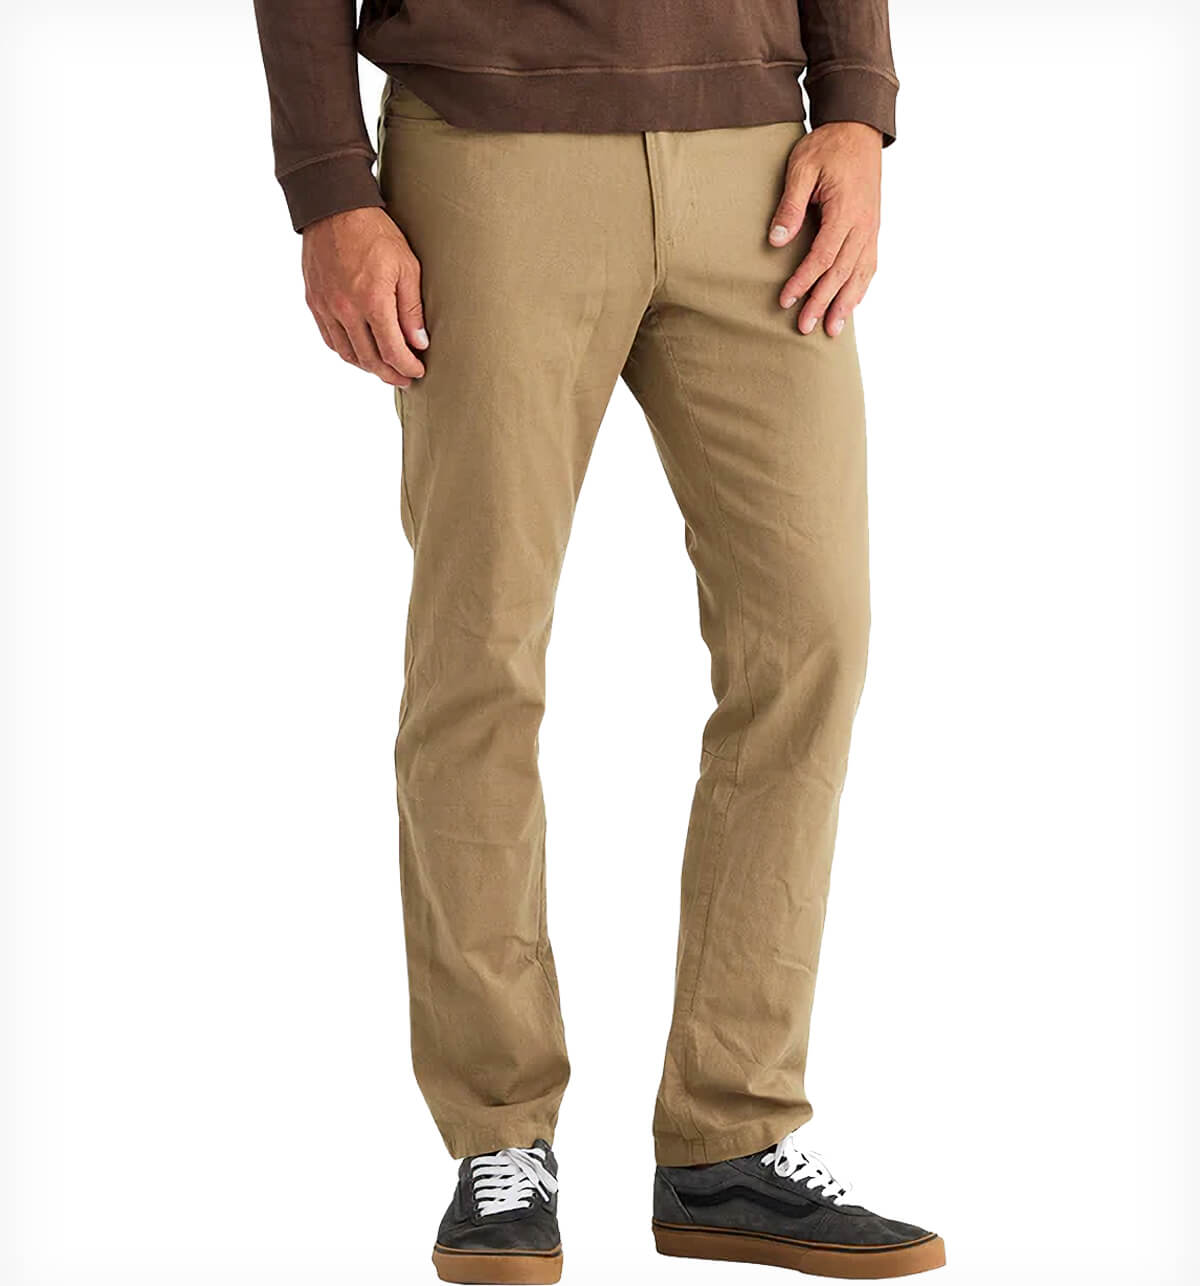 Review: Free Fly Men's Stretch Canvas 5 Pocket Pant